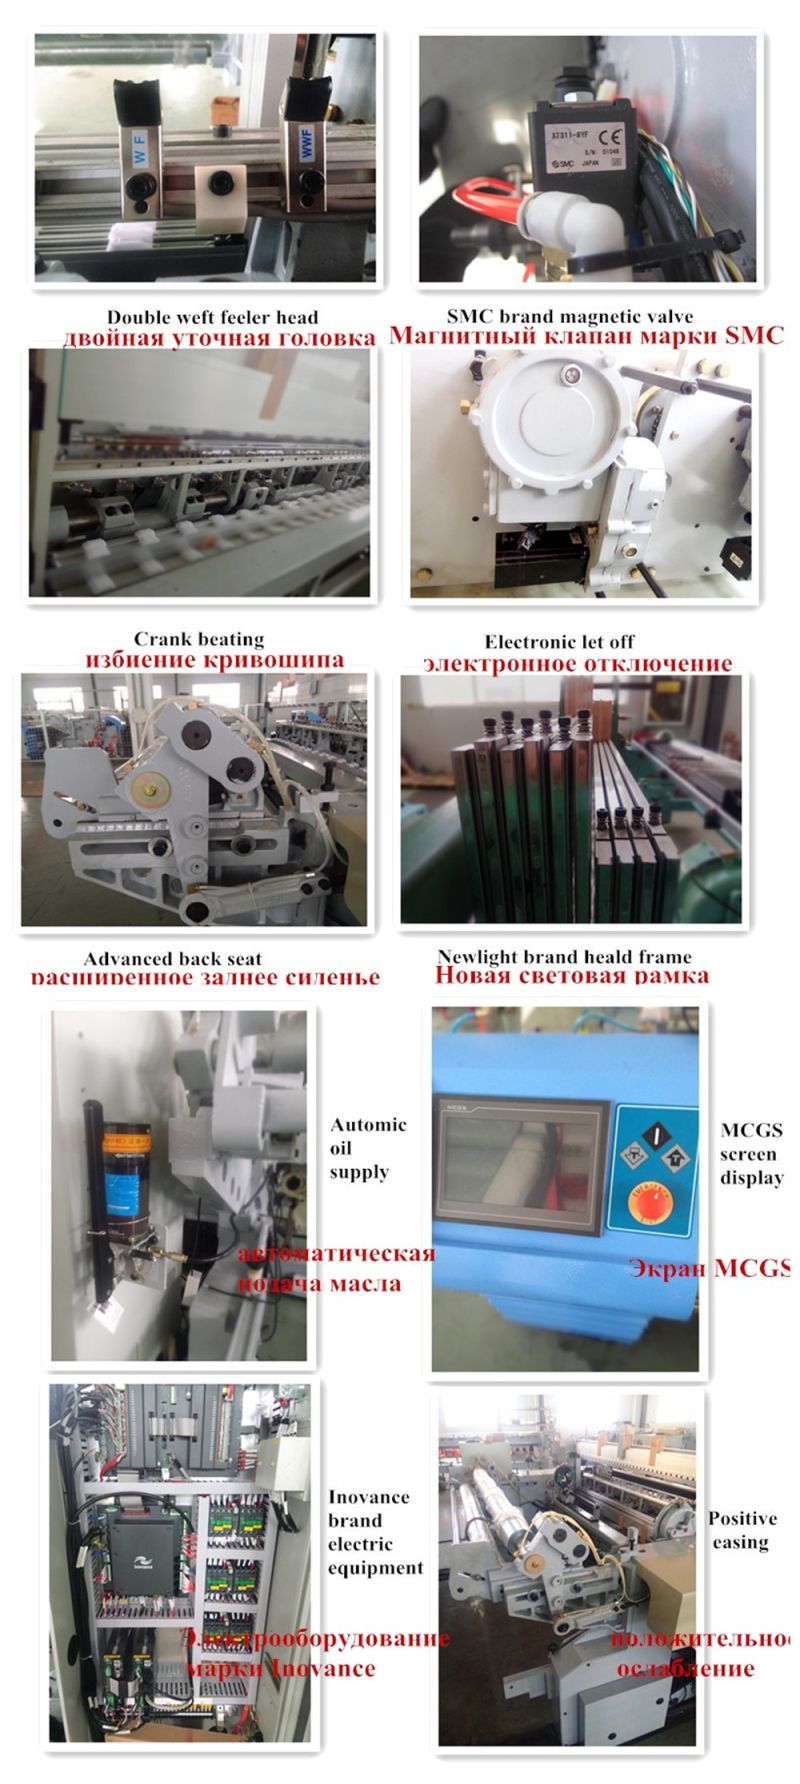 High Efficiency Double Nozzles Cam Dobby Shedding Weaving Air Jet Loom